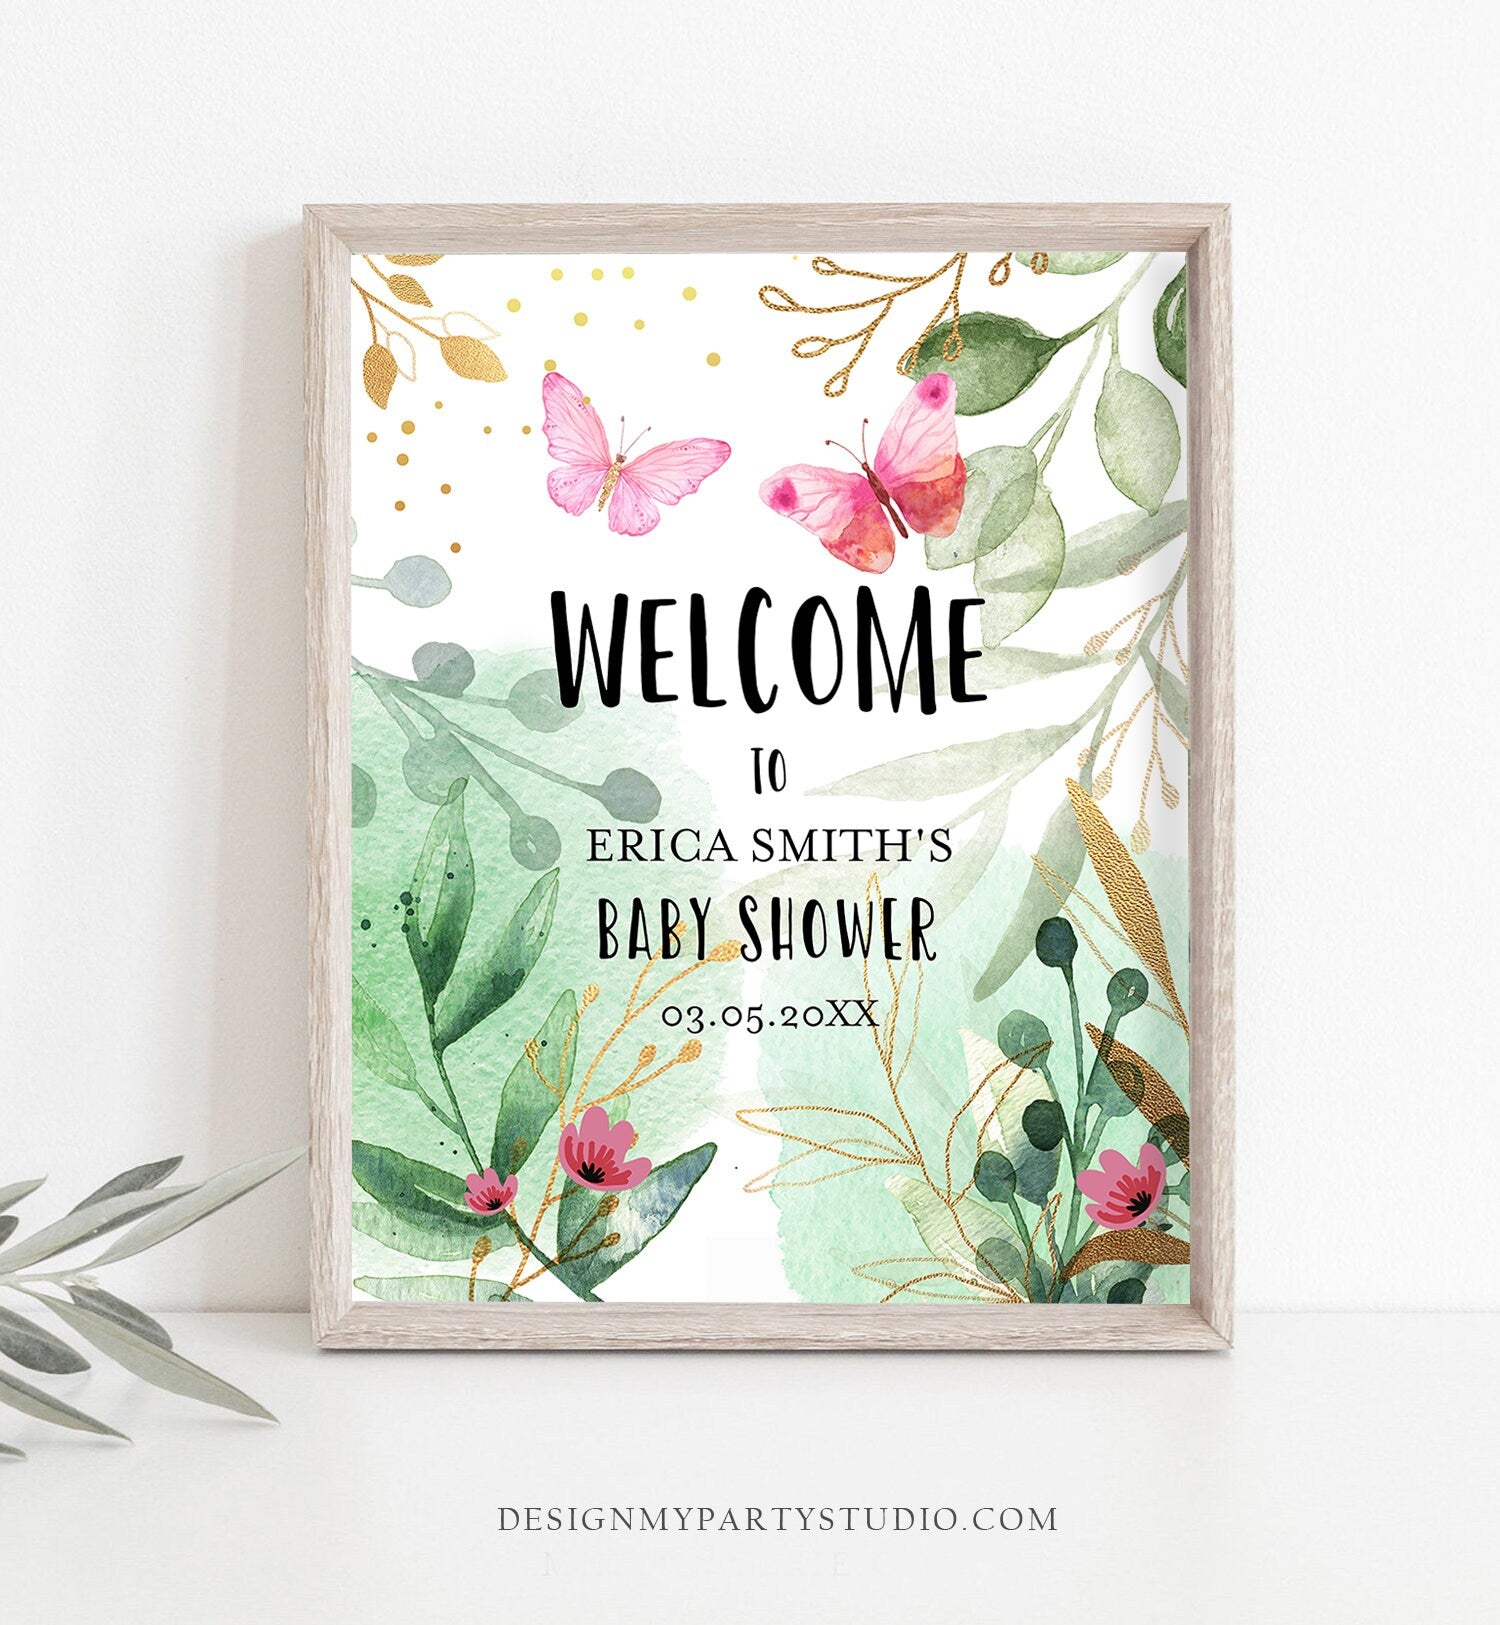 Editable Butterfly Welcome Sign Butterfly Baby Shower Spring Pink Gold Greenery Couples Shower Girl Table Sign Corjl Template Printable 0170